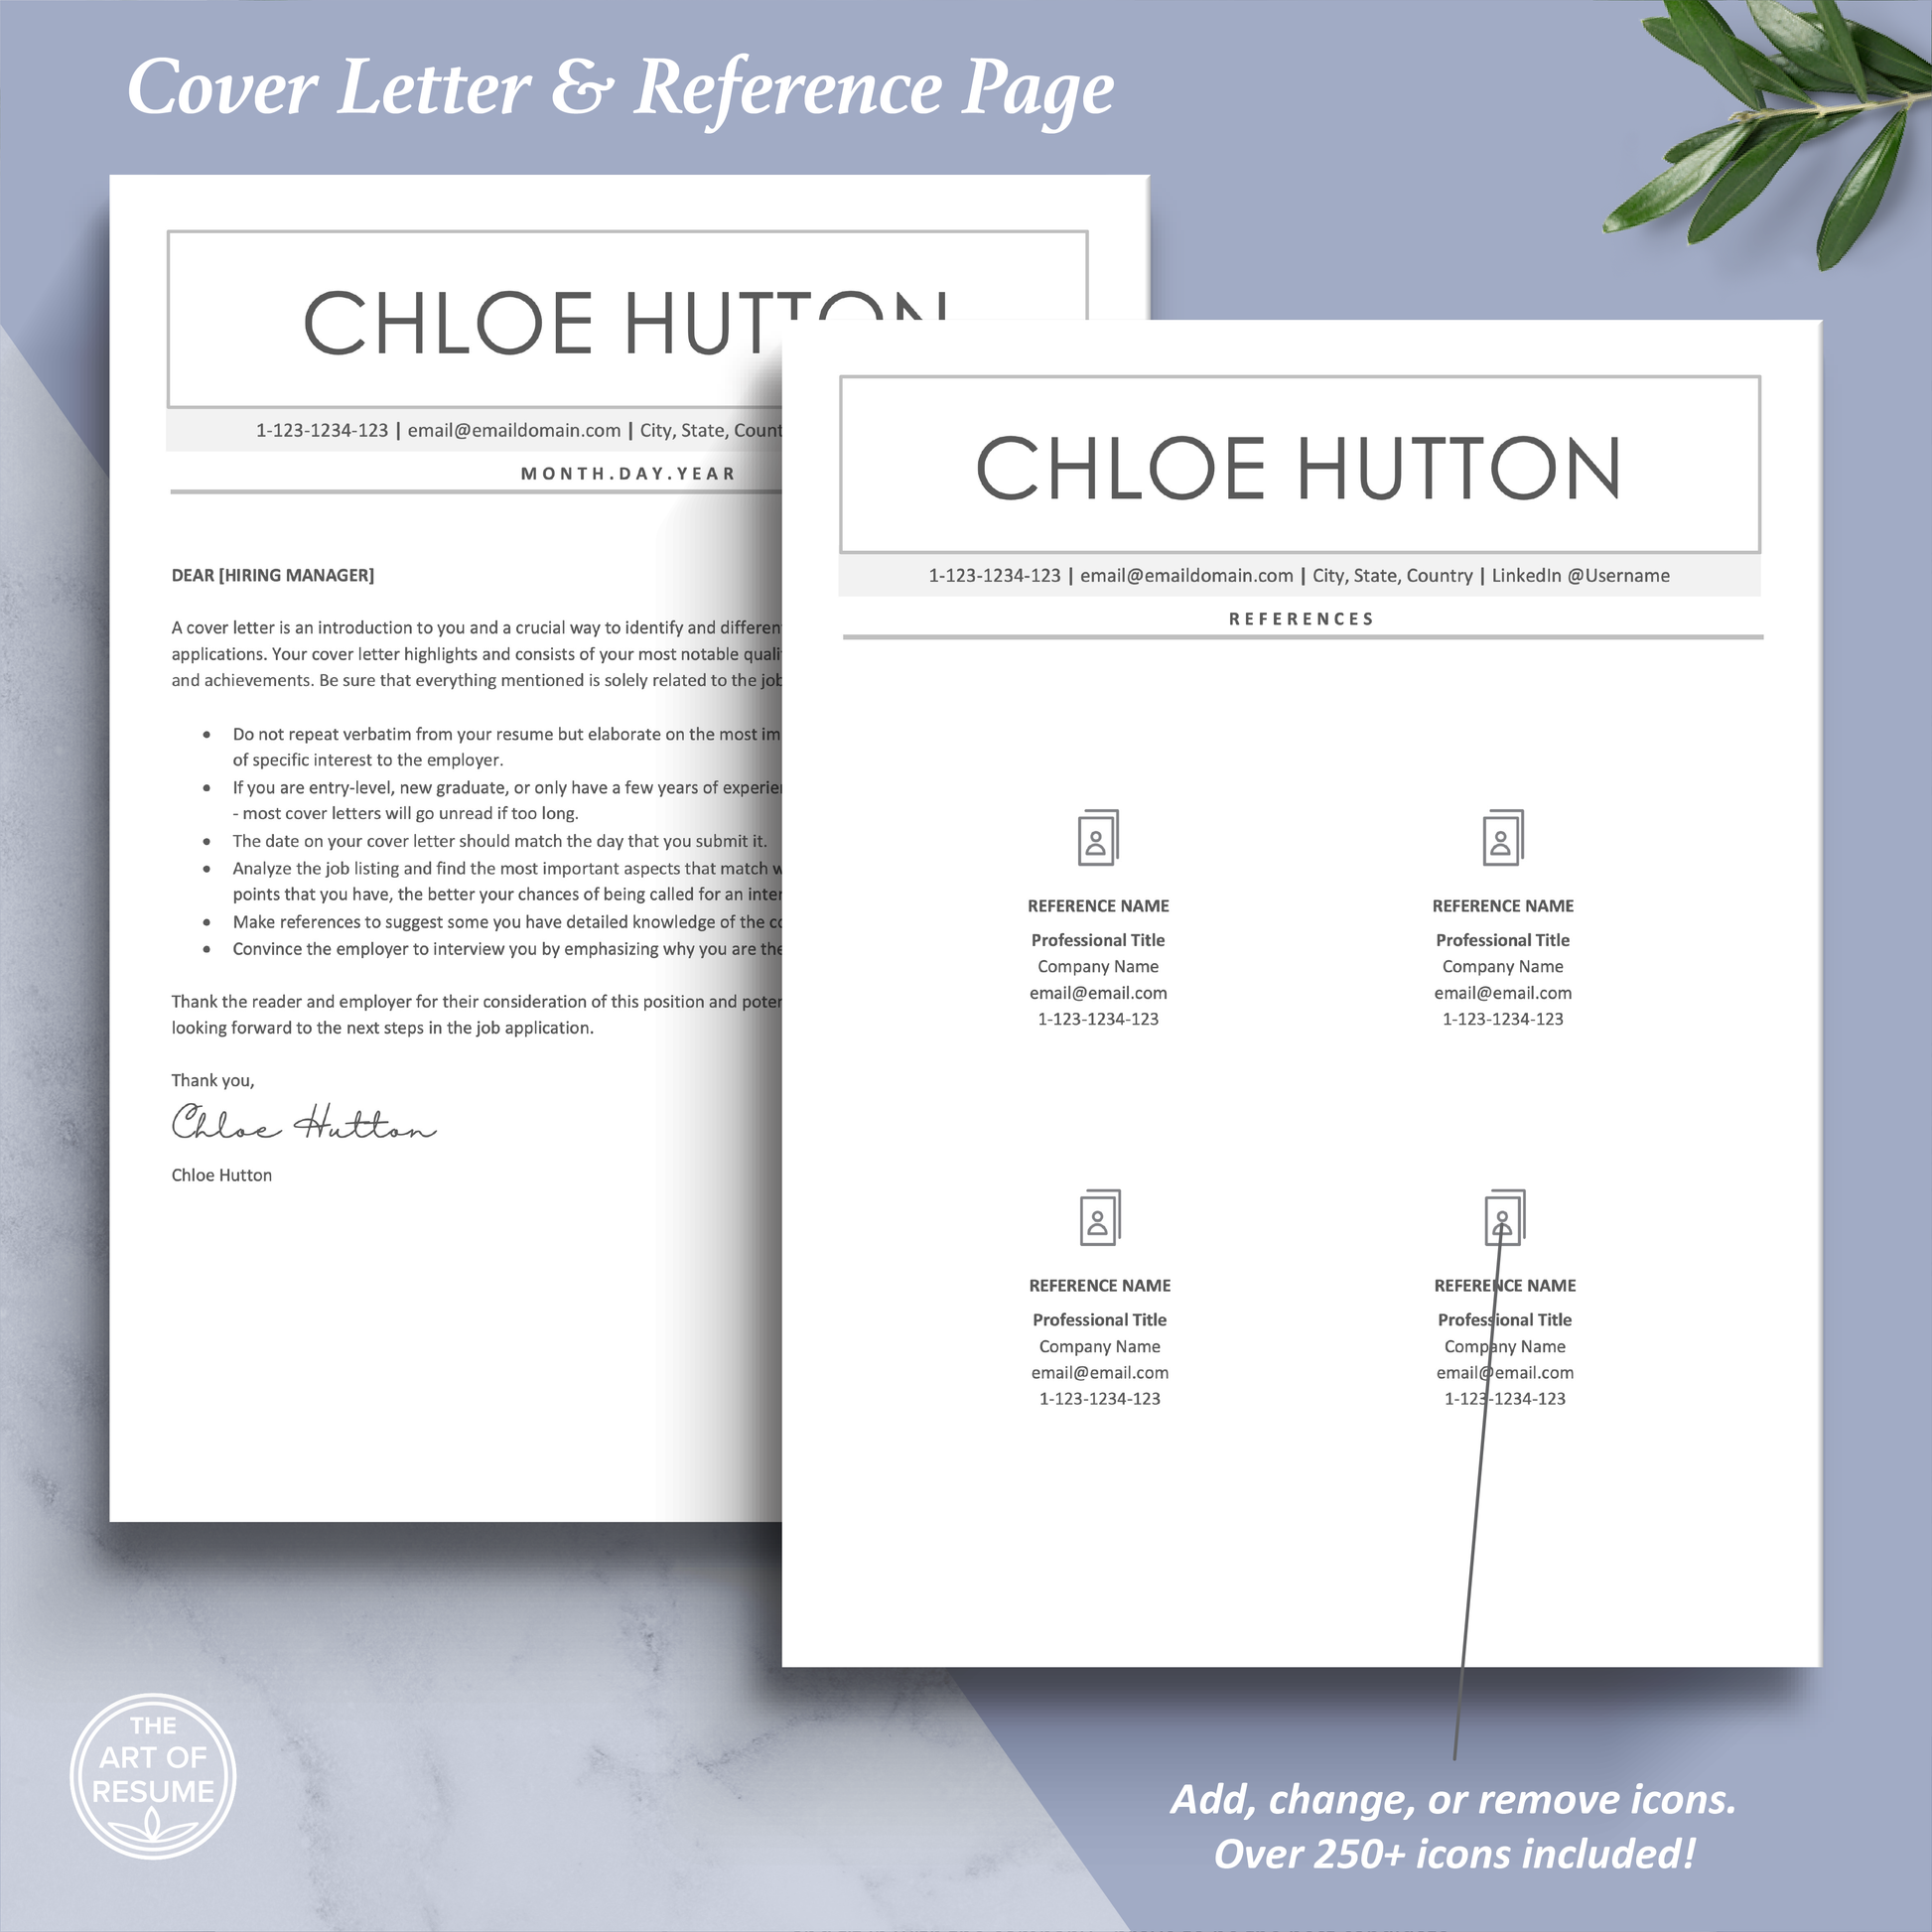 The Art of Resume Template | Cover Letter and Reference Page Template